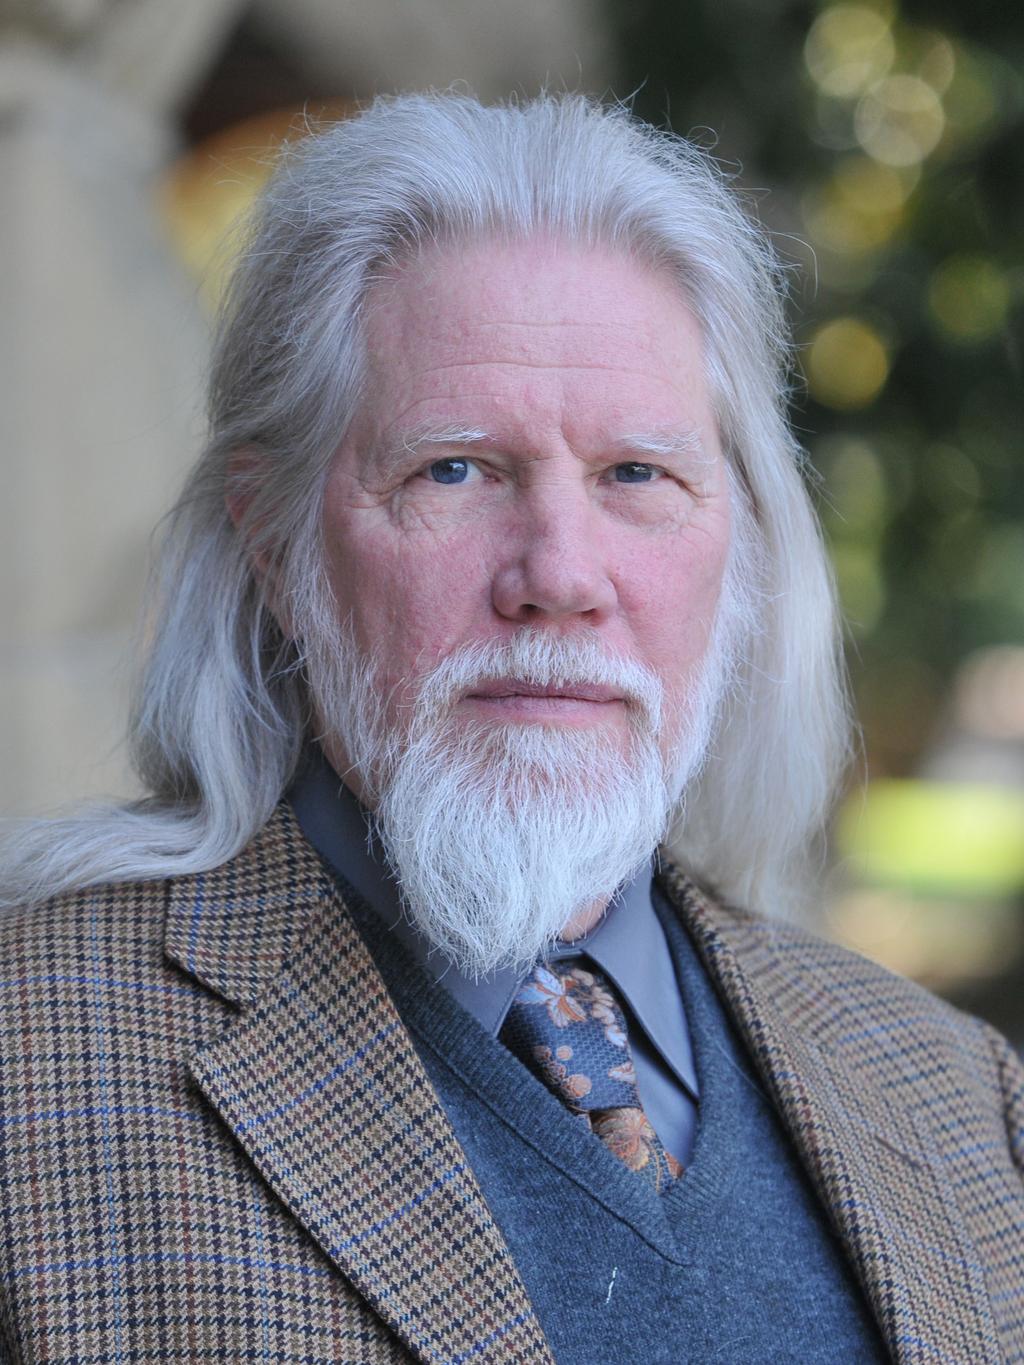 News flash: Turing Award Whitfield Diﬃe and Martin Hellman win the 2015 Turing Award! For critical contributions to modern cryptography.